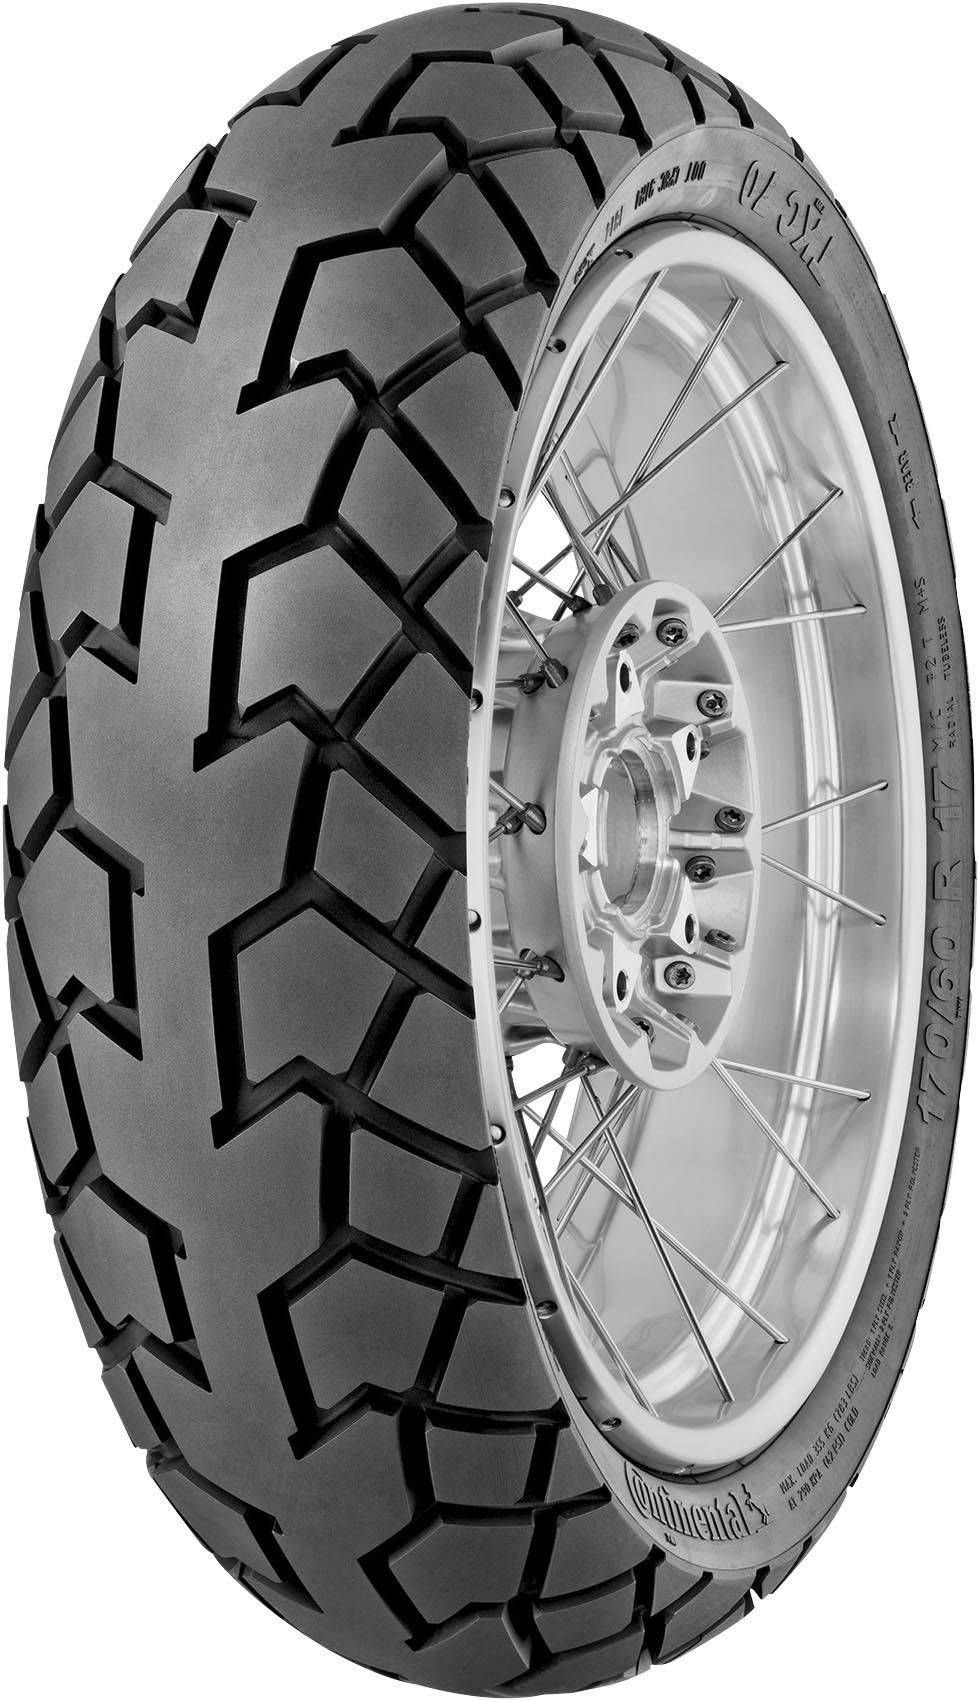 product_type-moto_tires CONTINENTAL TKC70R 150/70 R17 69S